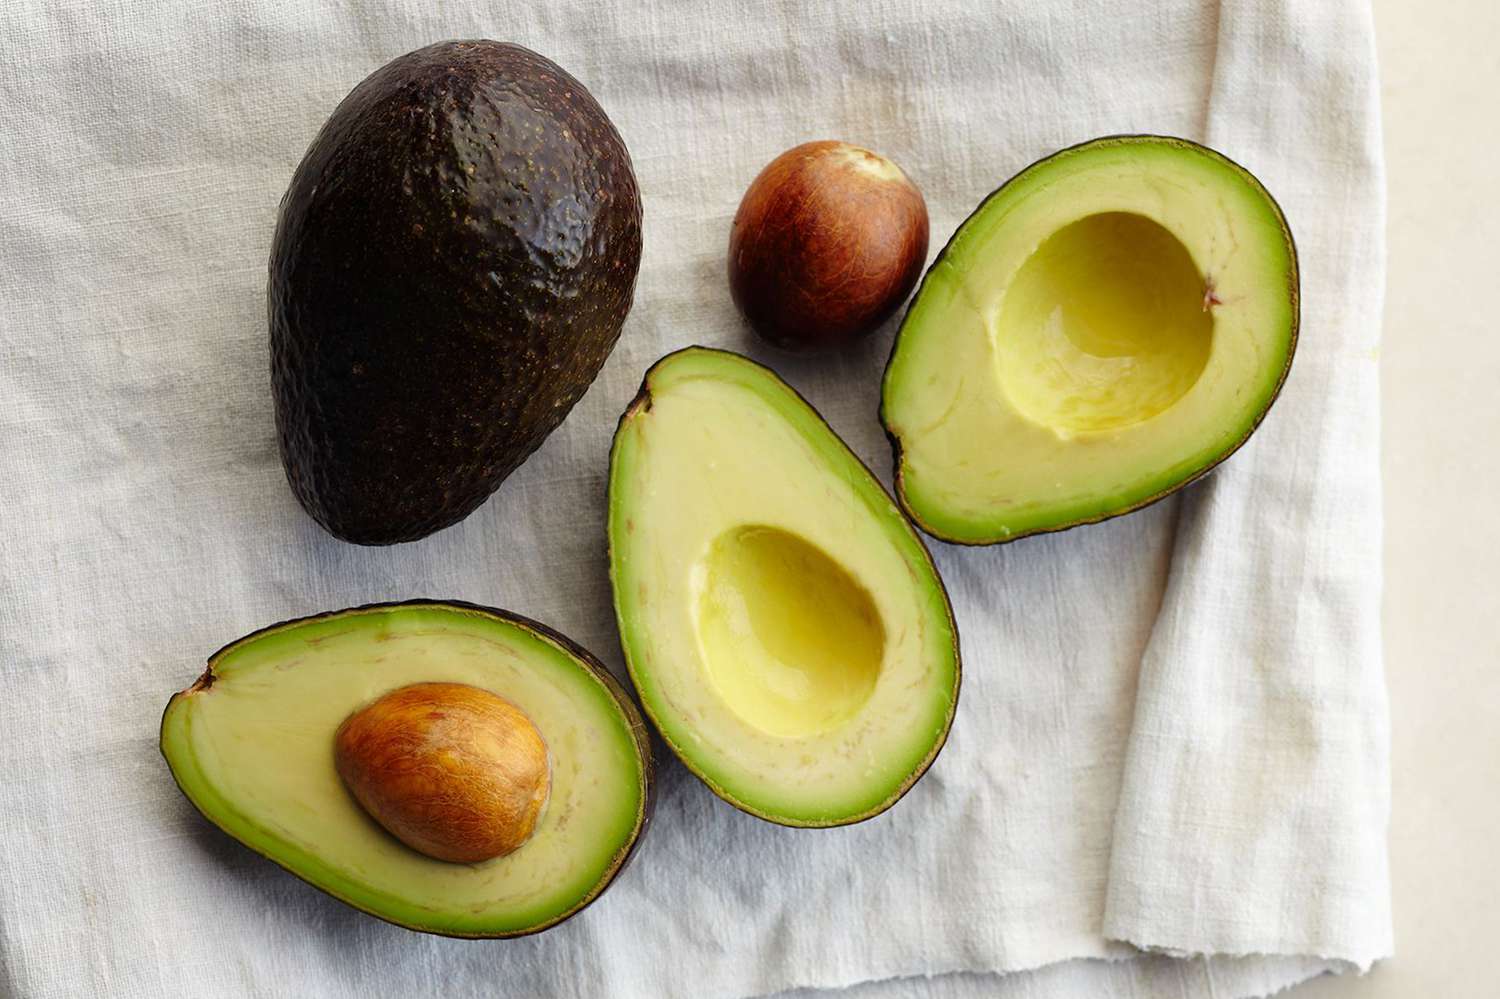 How to Pick a Ripe Avocado—and Ripen an Avocado Quickly